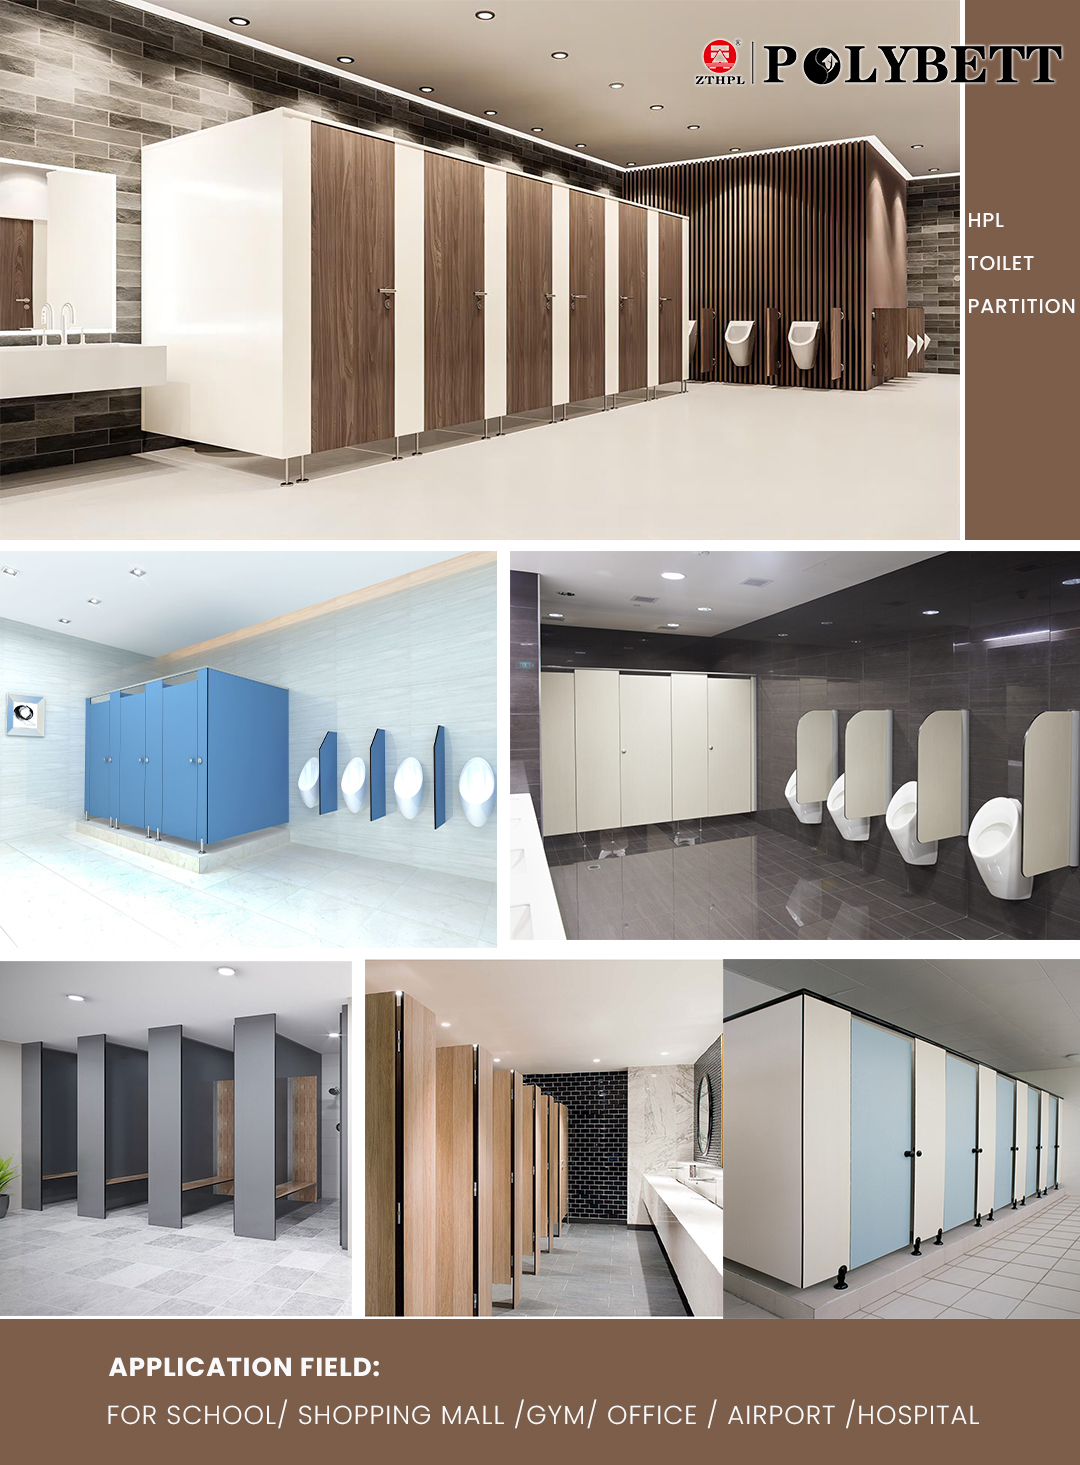 compact laminate board for toilet partitions Application field